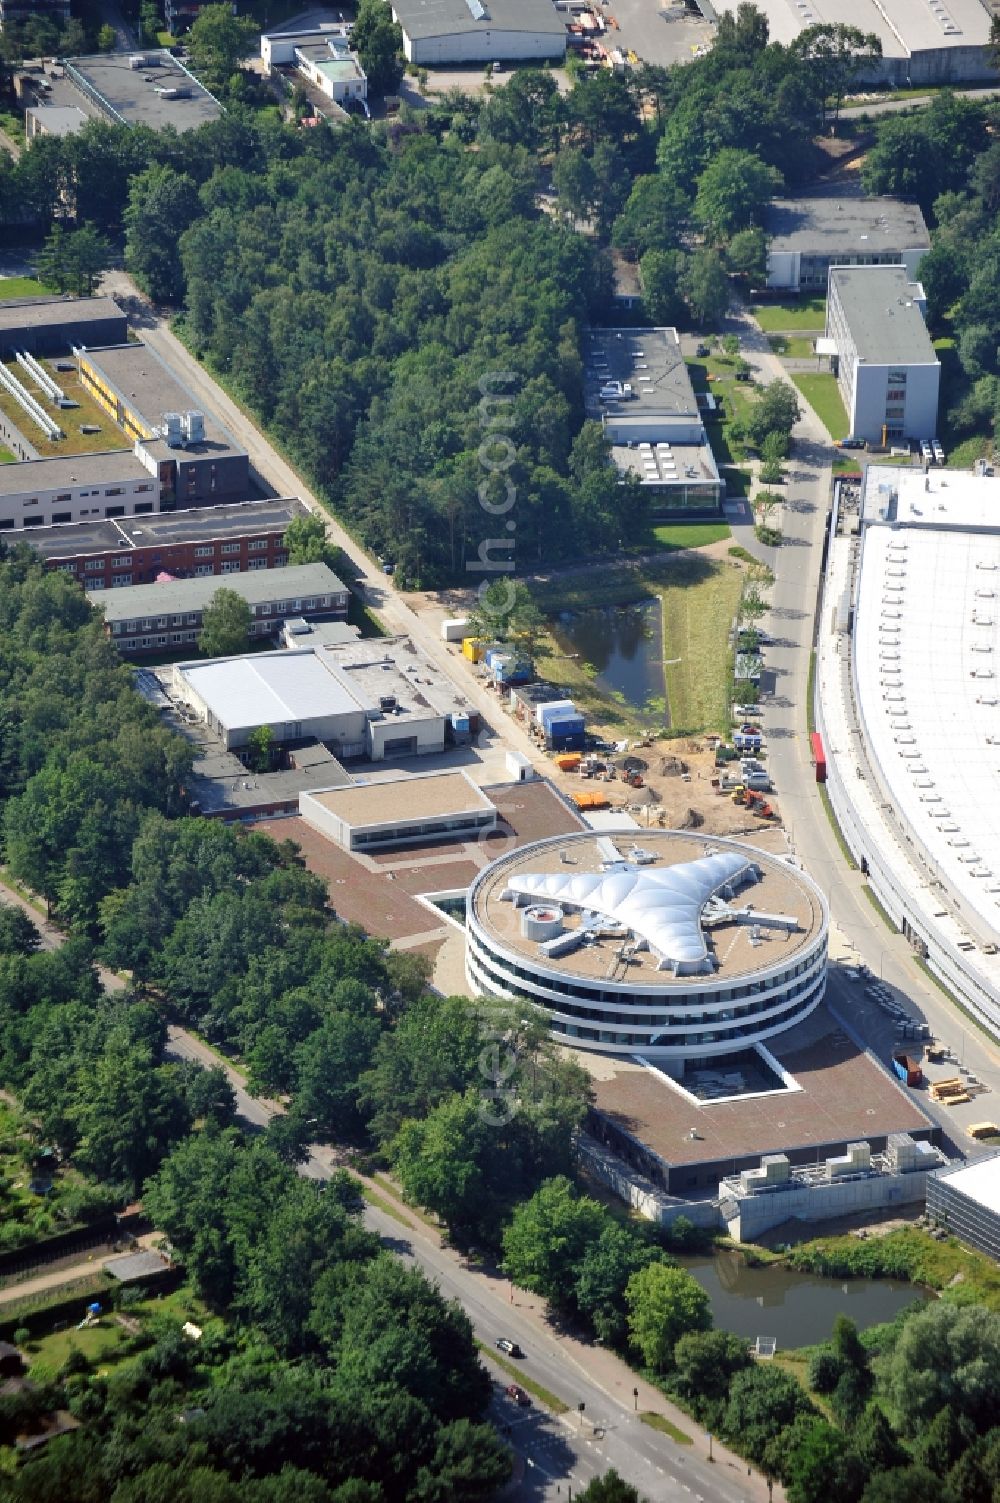 Hamburg from the bird's eye view: The new building of the site of EMBL, the European Molecular Biology Laboratory (EMBL) at the particle accelerator Petra III Hamburg. The European Molecular Biology Laboratory is a non-profit organisation and a basic research institute funded by public research monies from 20 member states and one associate member